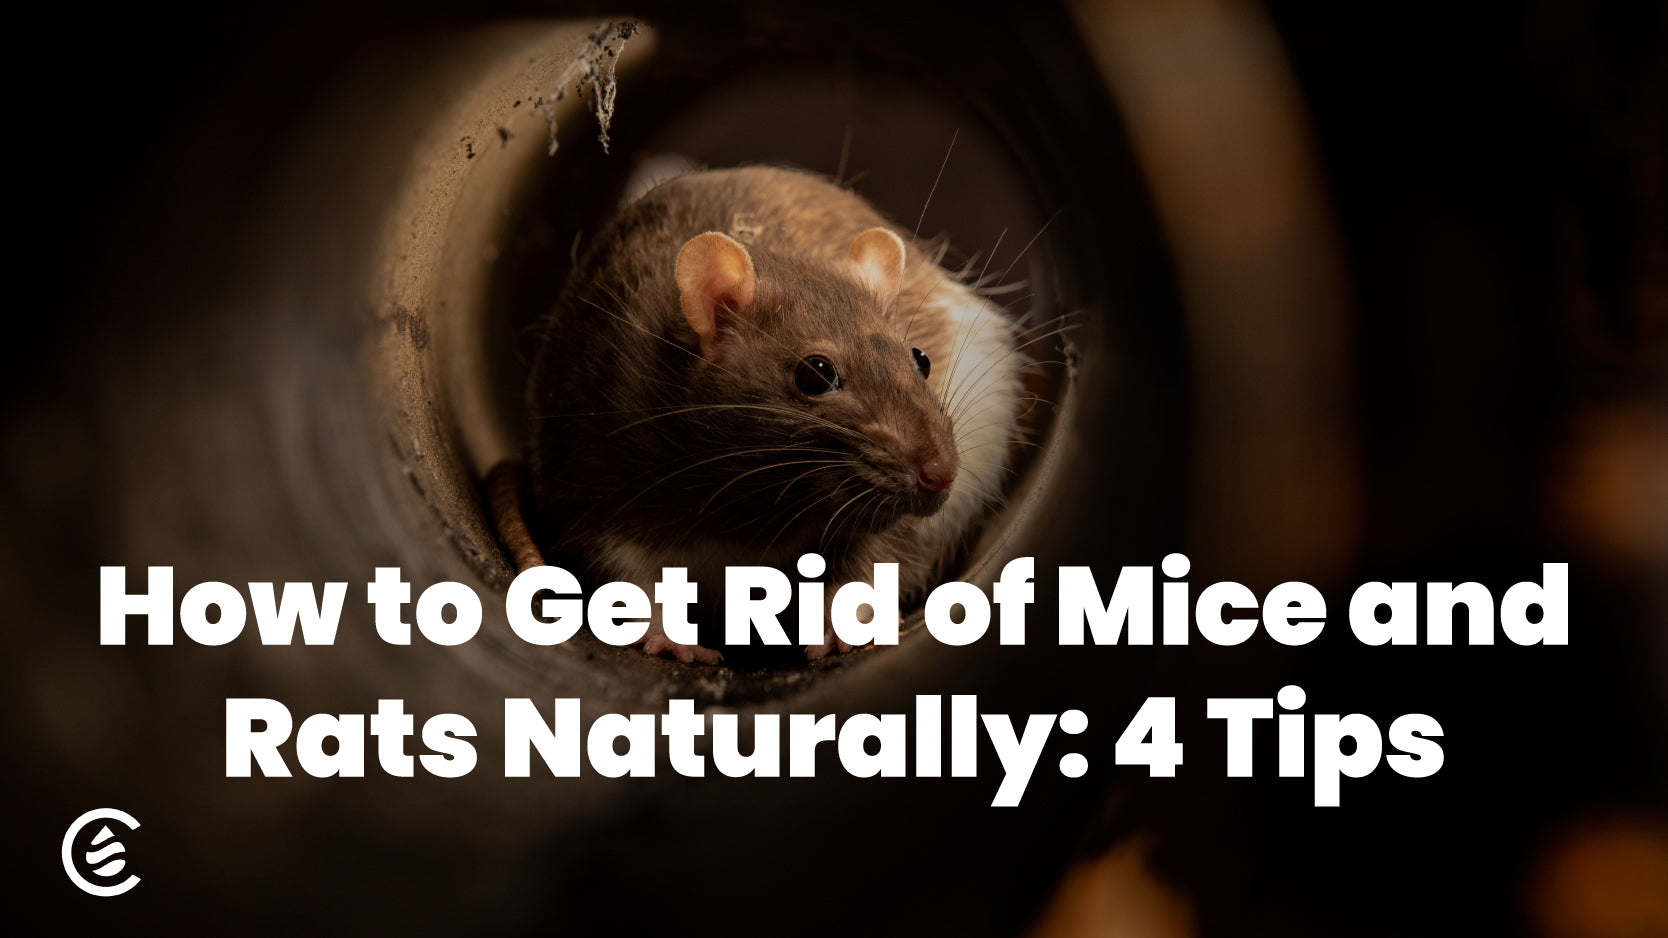 How to Get Rid of Mice and Rats Naturally: 4 Tips